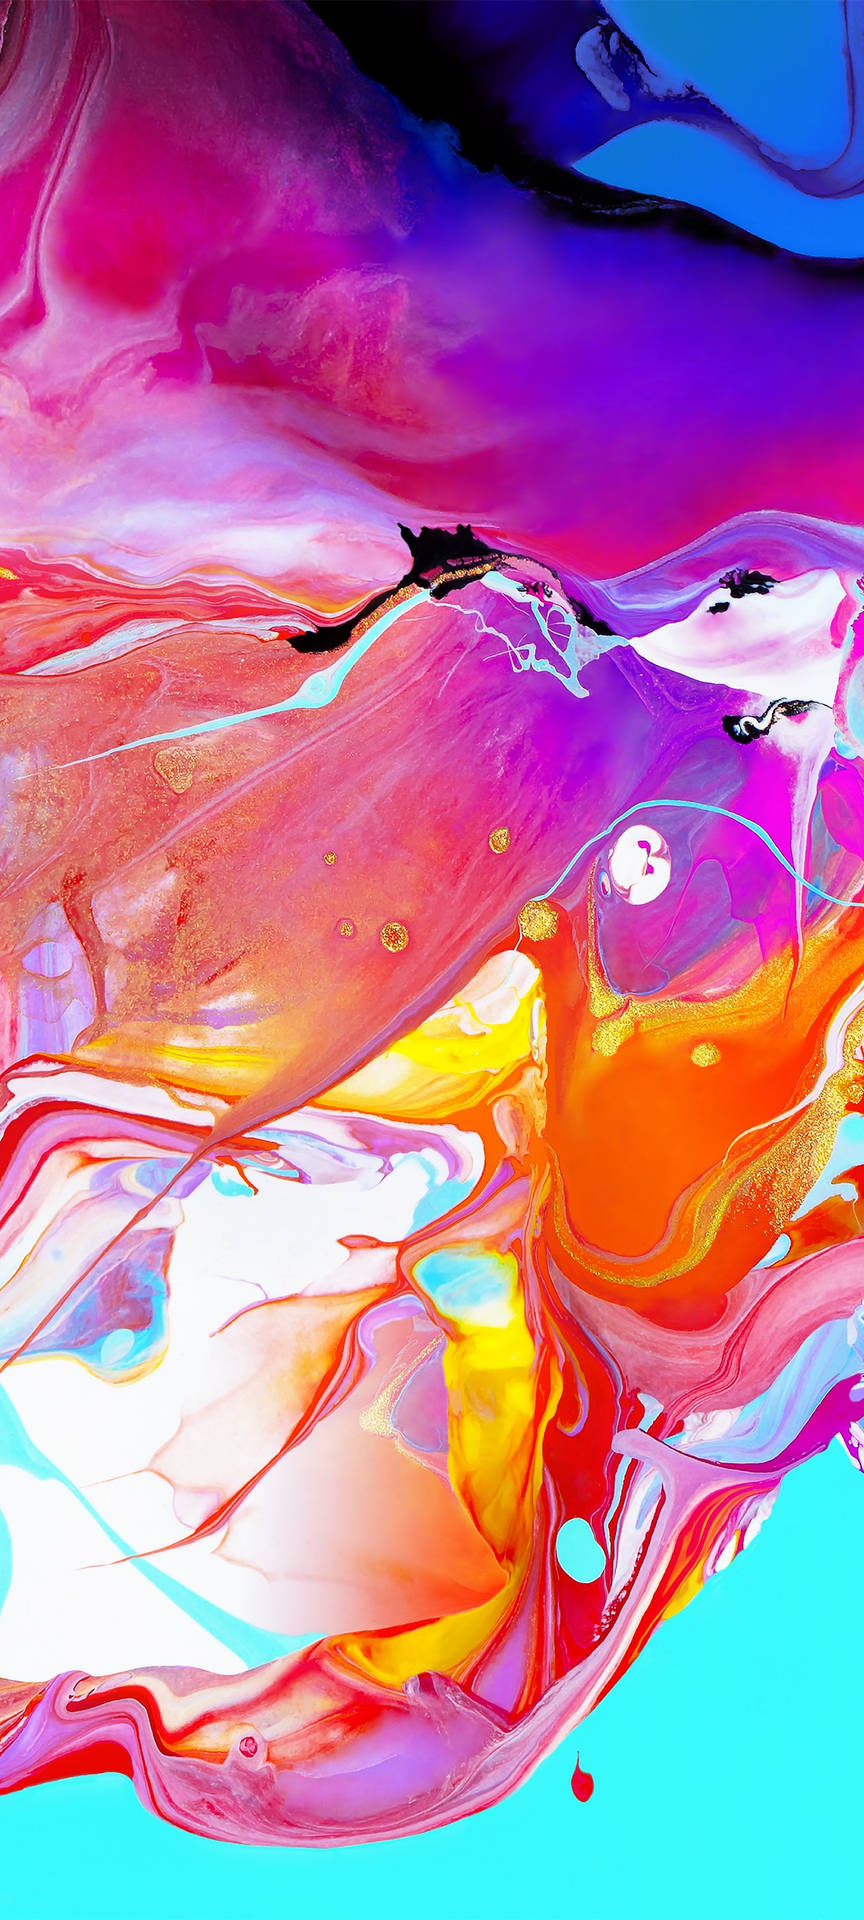 Download Samsung A51 Colorful Abstract Painting Wallpaper | Wallpapers.com